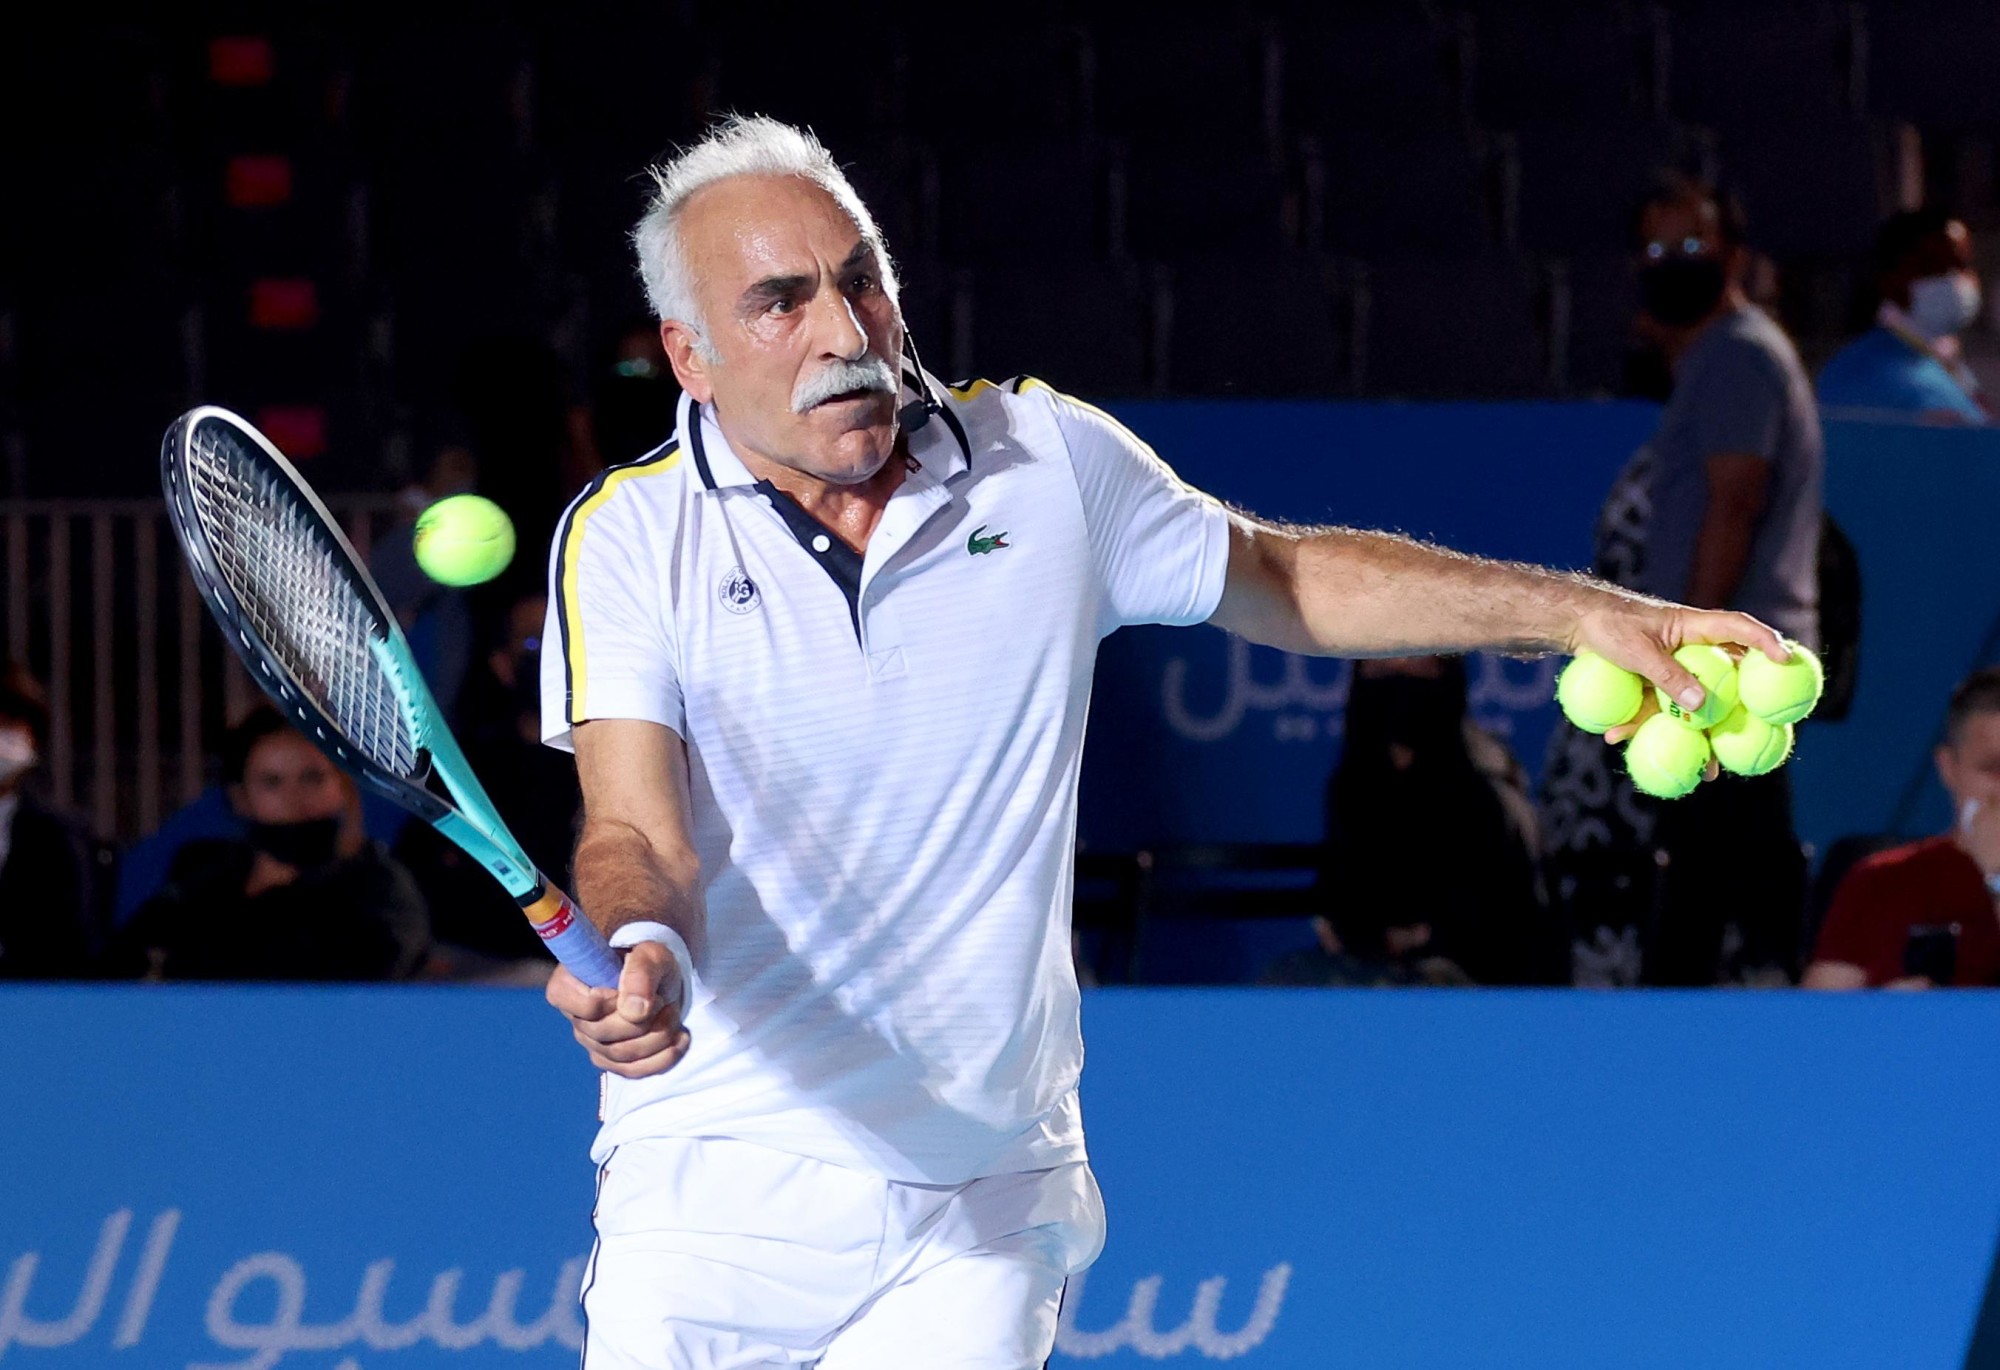 Tennis Player Mansour Bahrami in the Men-s Exhibition Match against Fabrice Santoro during World Tennis week at the Expo Sports Arena m52869